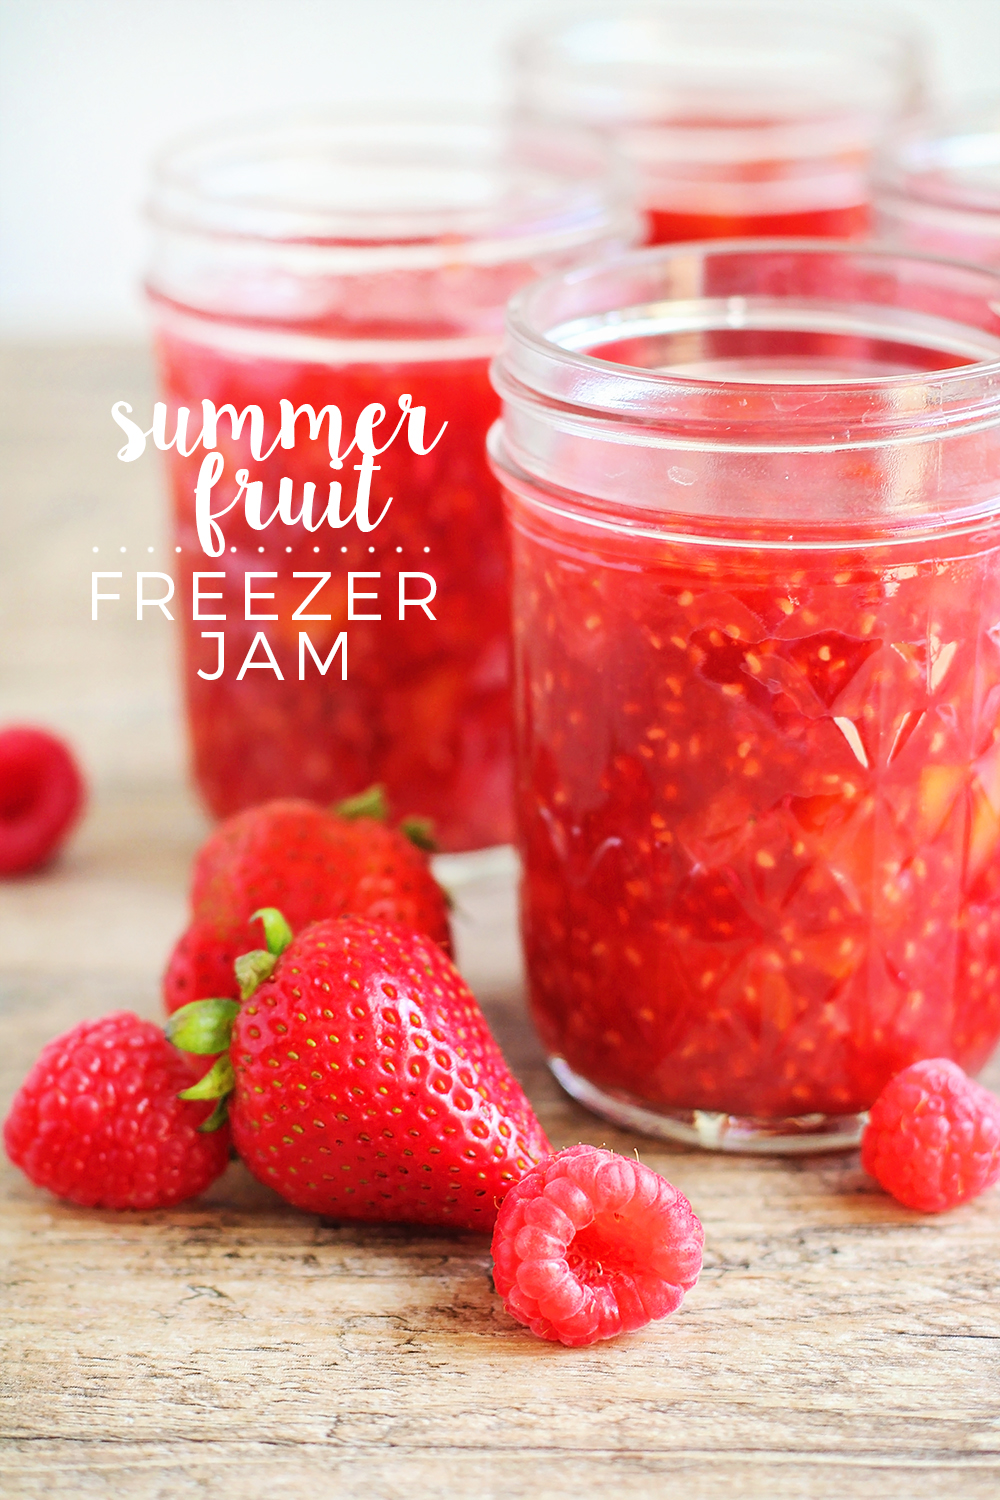 This summer fruit freezer jam is the perfect way to use all that delicious summer fruit! It's ready in less than thirty minutes, and stays fresh in the freezer so you can enjoy it all year long!